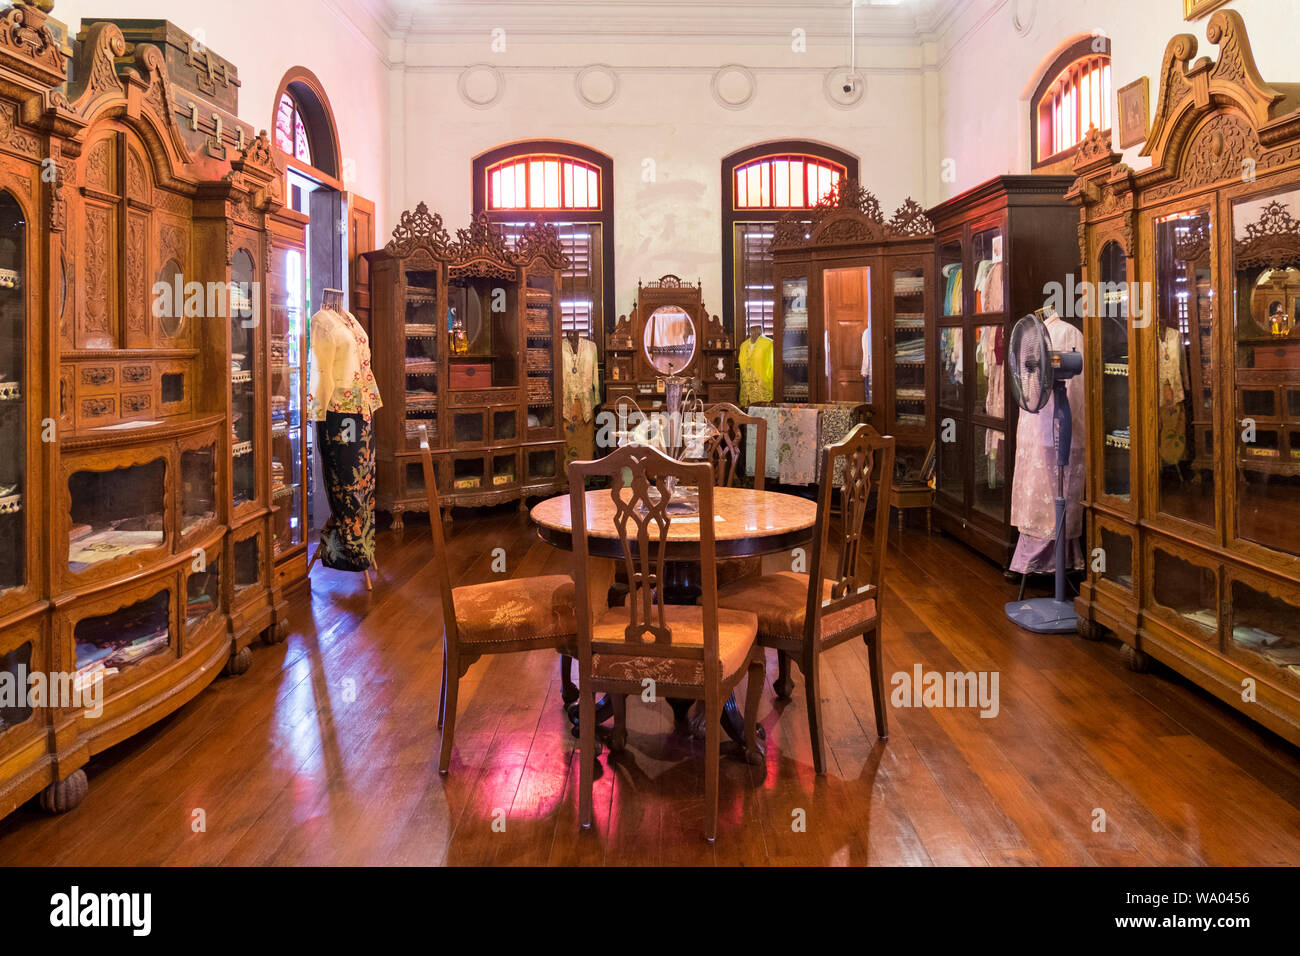 Wardrobe that takes up a whole big room of the oppulent Pinang Peranakan Mansion in George Town, Penang, Malaysia. Stock Photo